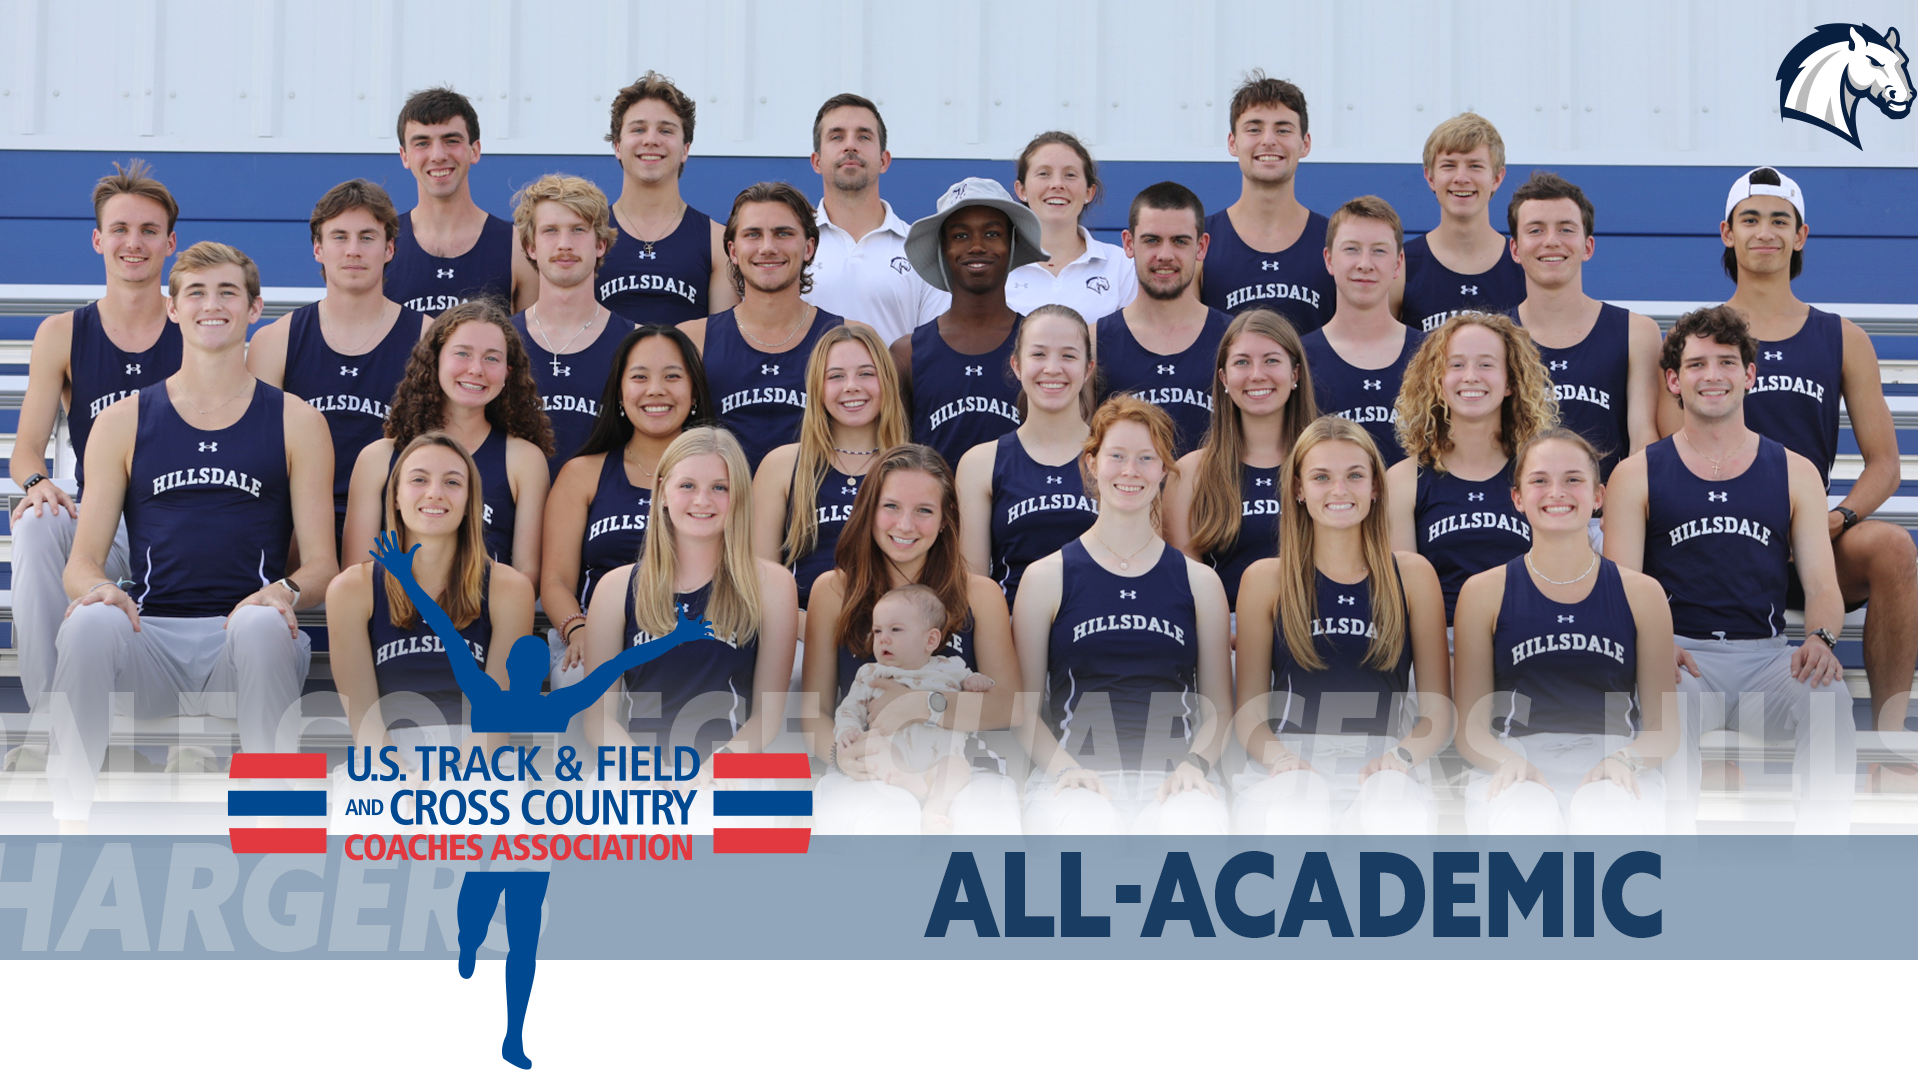 Chargers men and women's cross country teams receive 11th straight academic honor from USTFCCCA